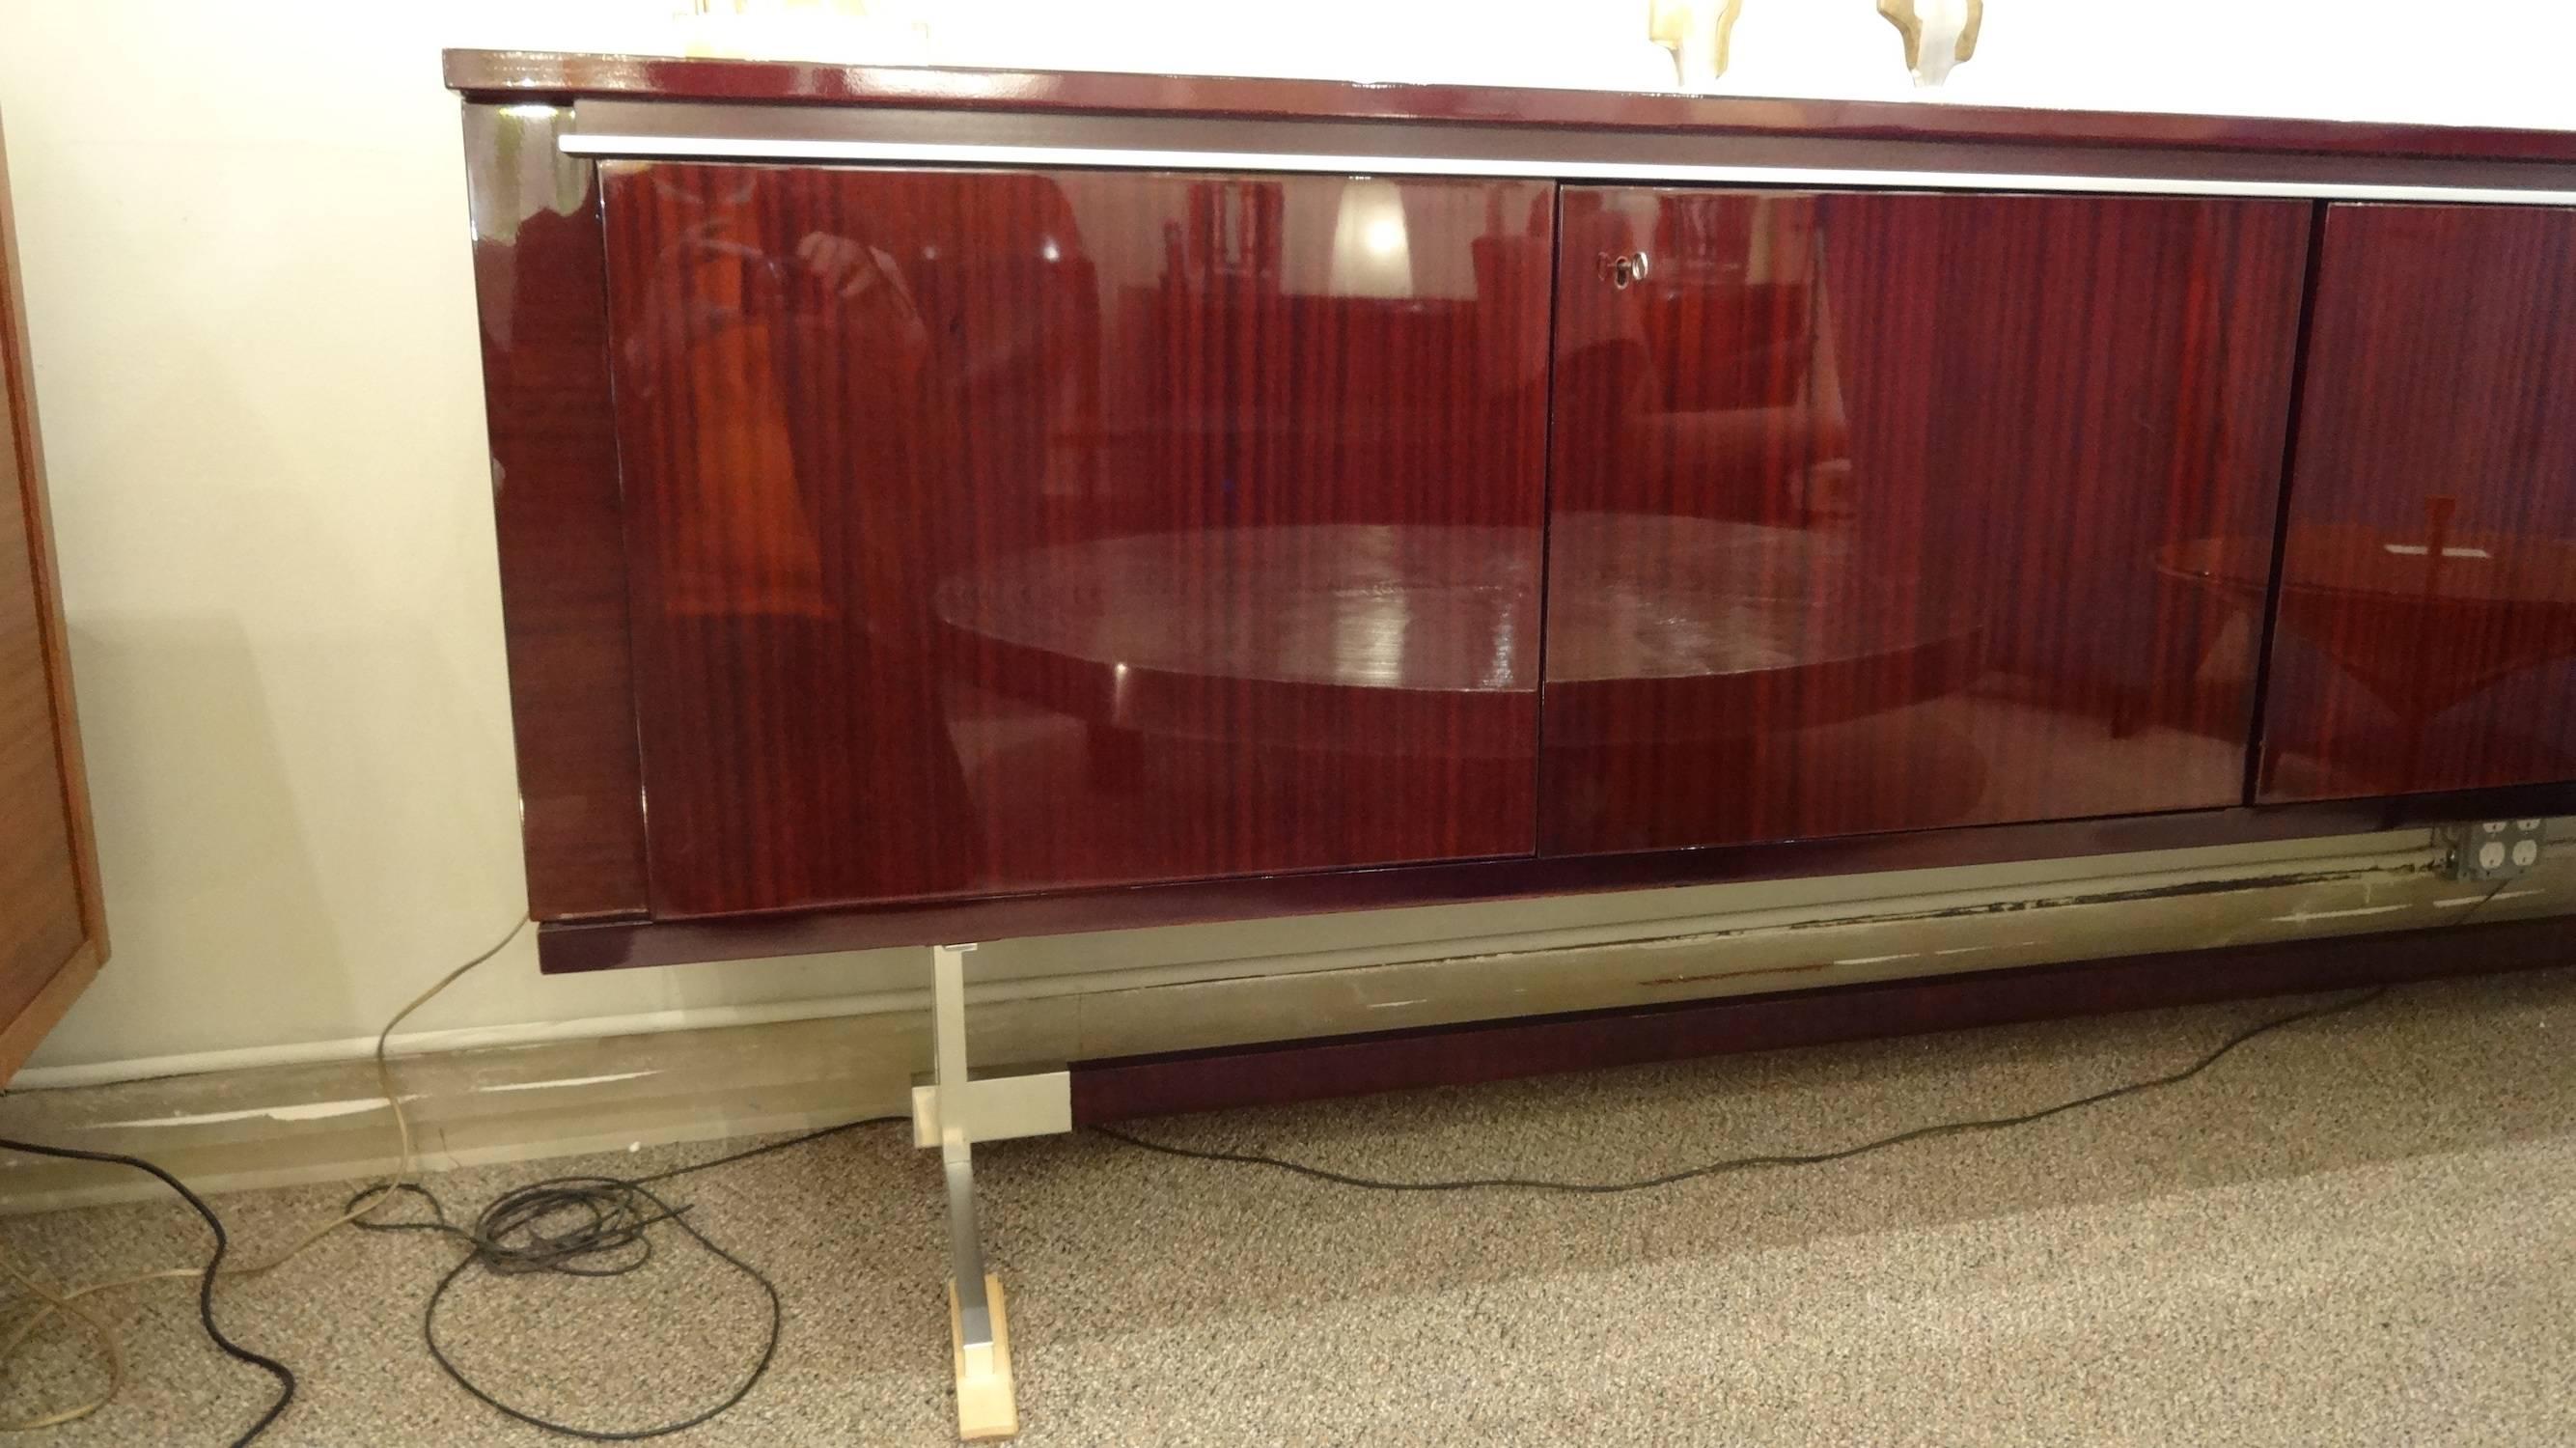 A modernist sideboard featuring a body in polished rosewood with four doors and a band of aluminum running just below the pieces top which is used as the doors handles. The body of the sideboard is supported by a double pedestal modernist base in